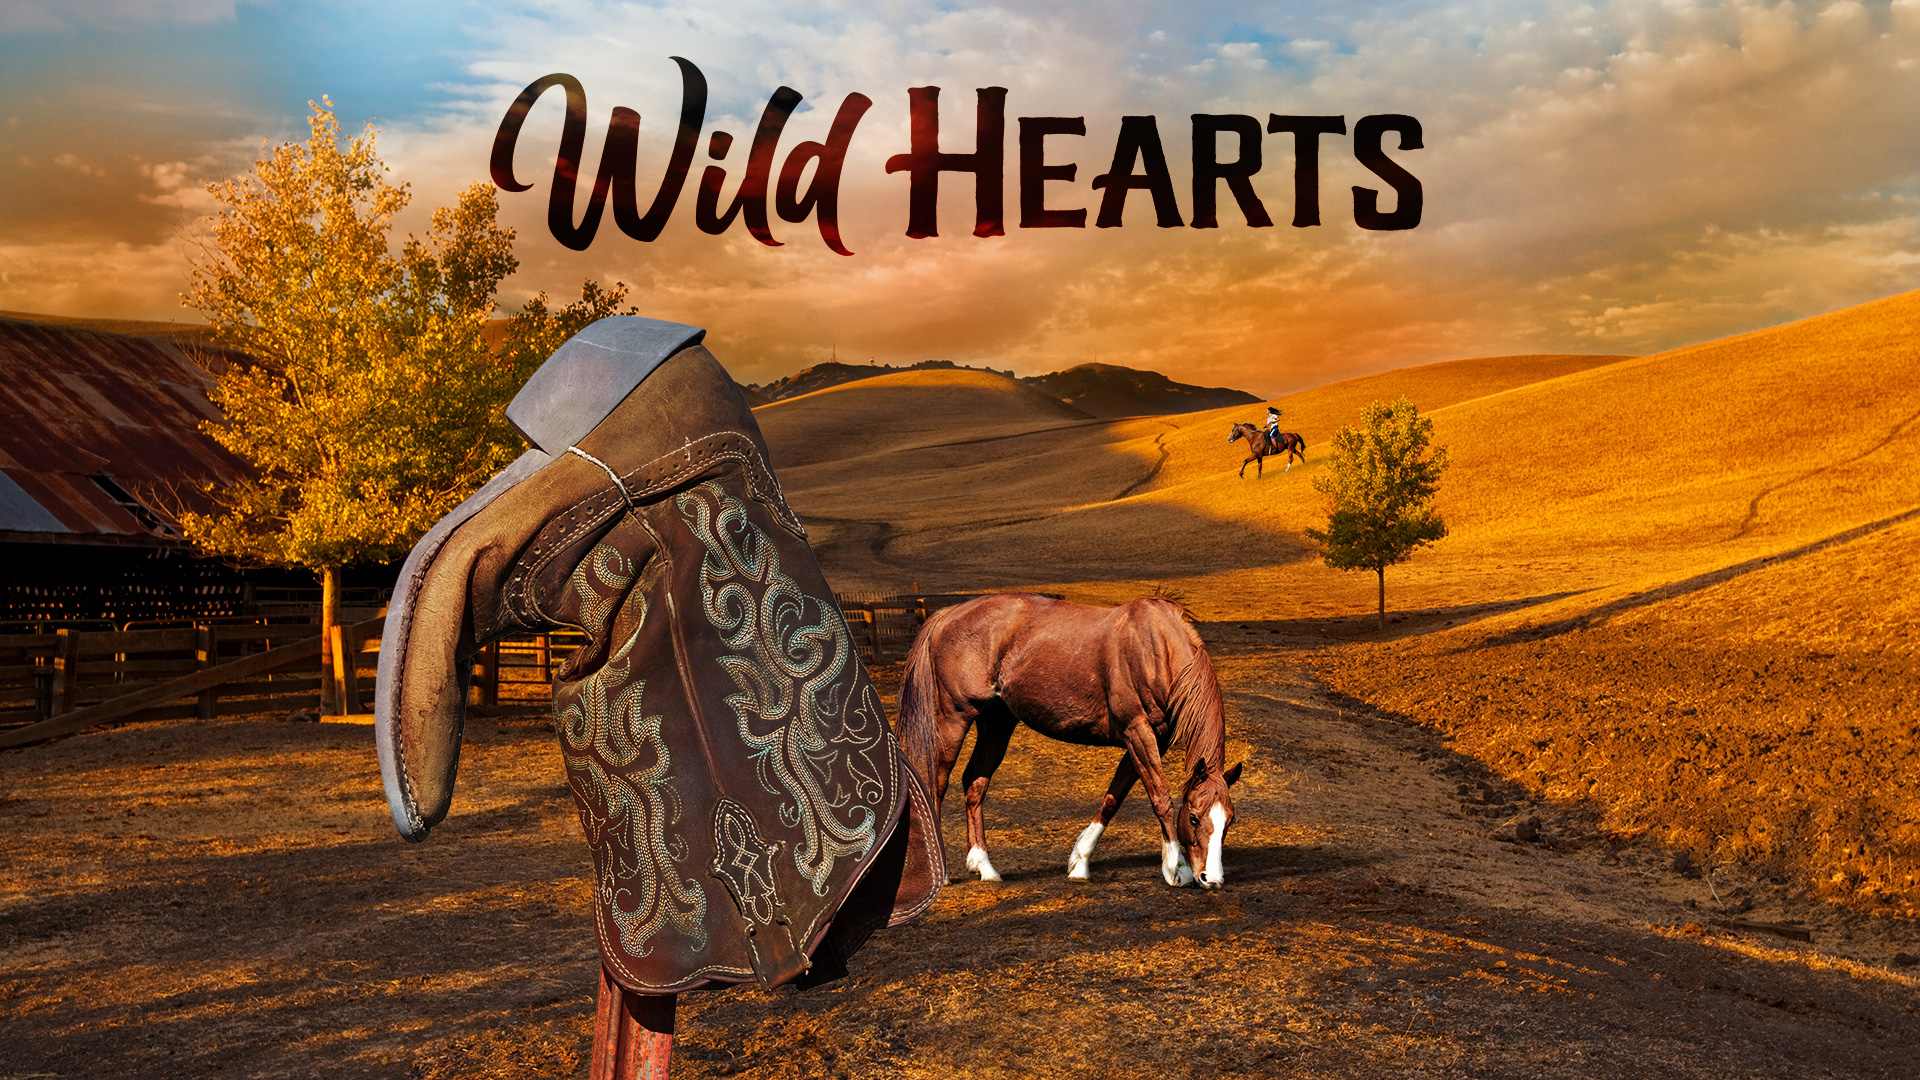 wild hearts our wild hearts